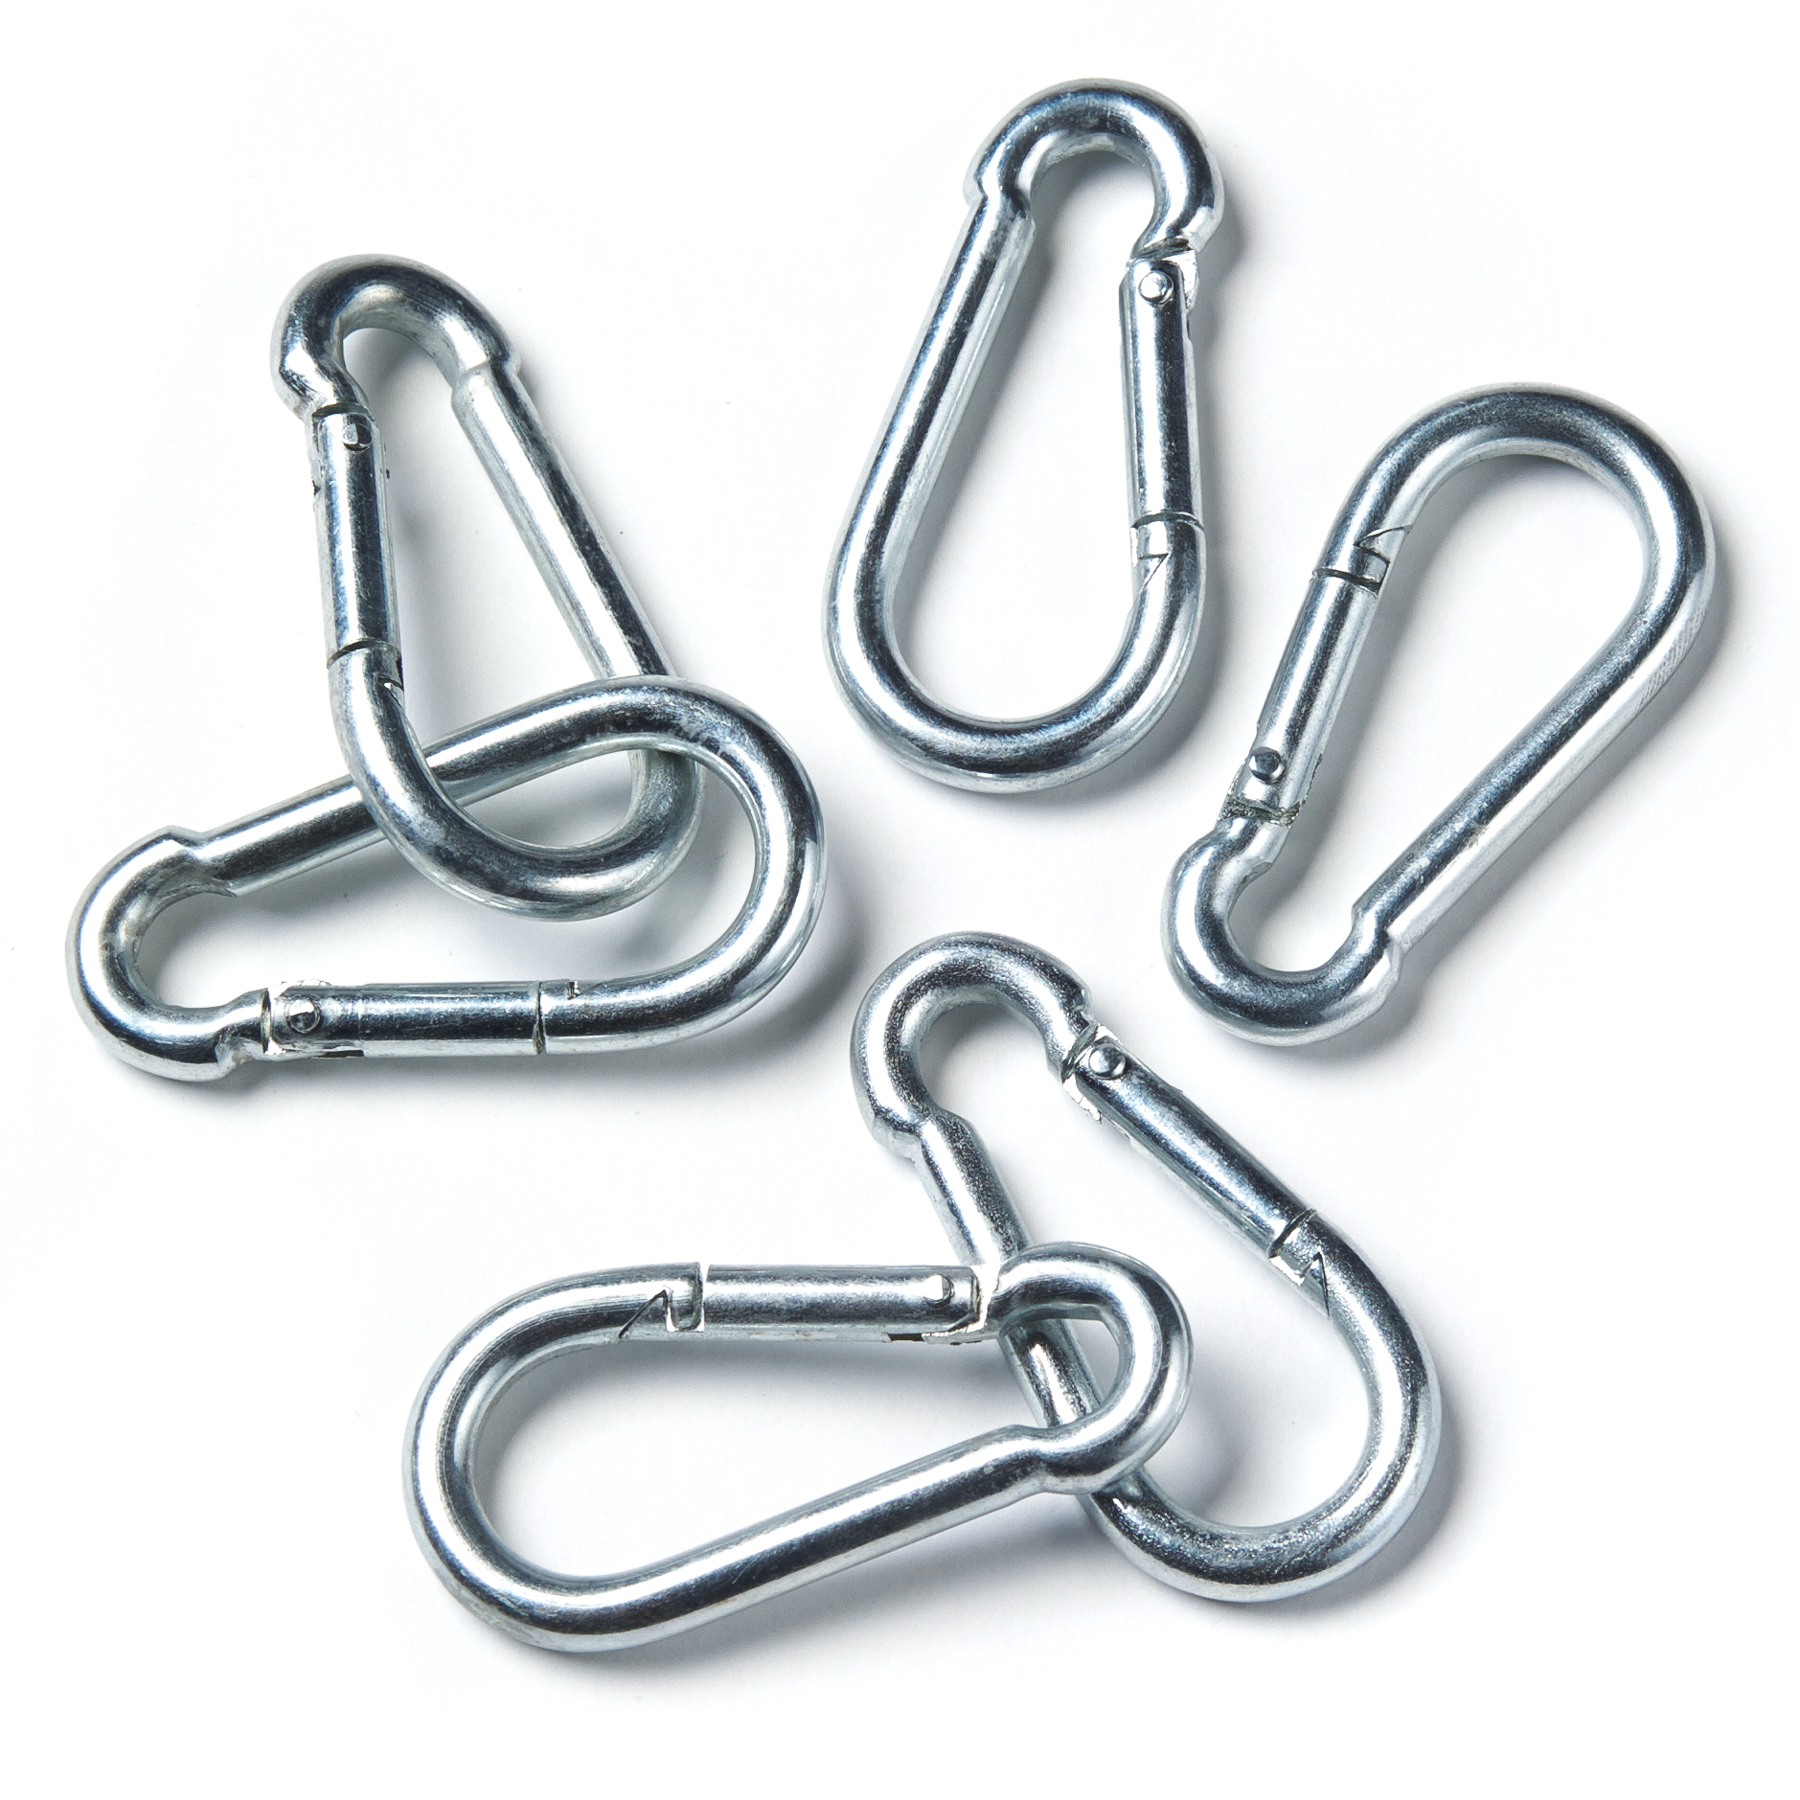 Carabiner Stainless Steel Clip Snap Spring Link Hook Buckle 5mm x 50mm 50 2" lot 